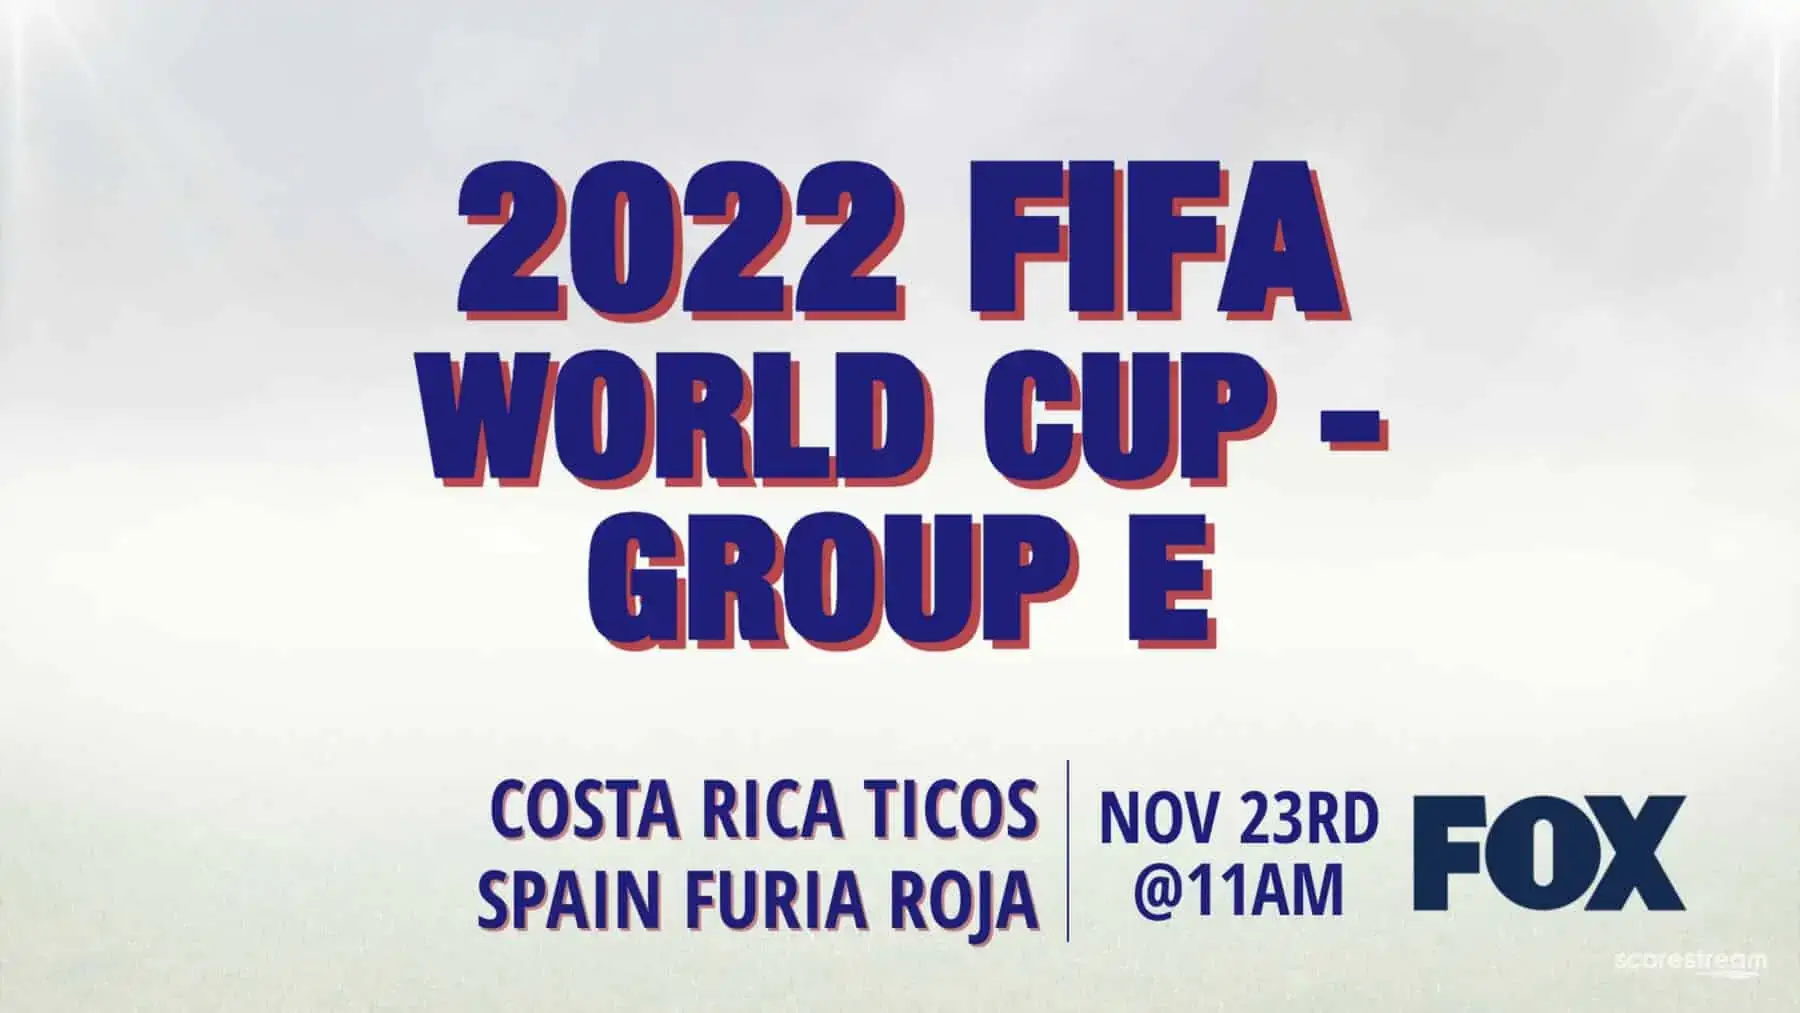 Watch Costa Rica vs Spain FIFA World Cup 2022 live streaming coverage